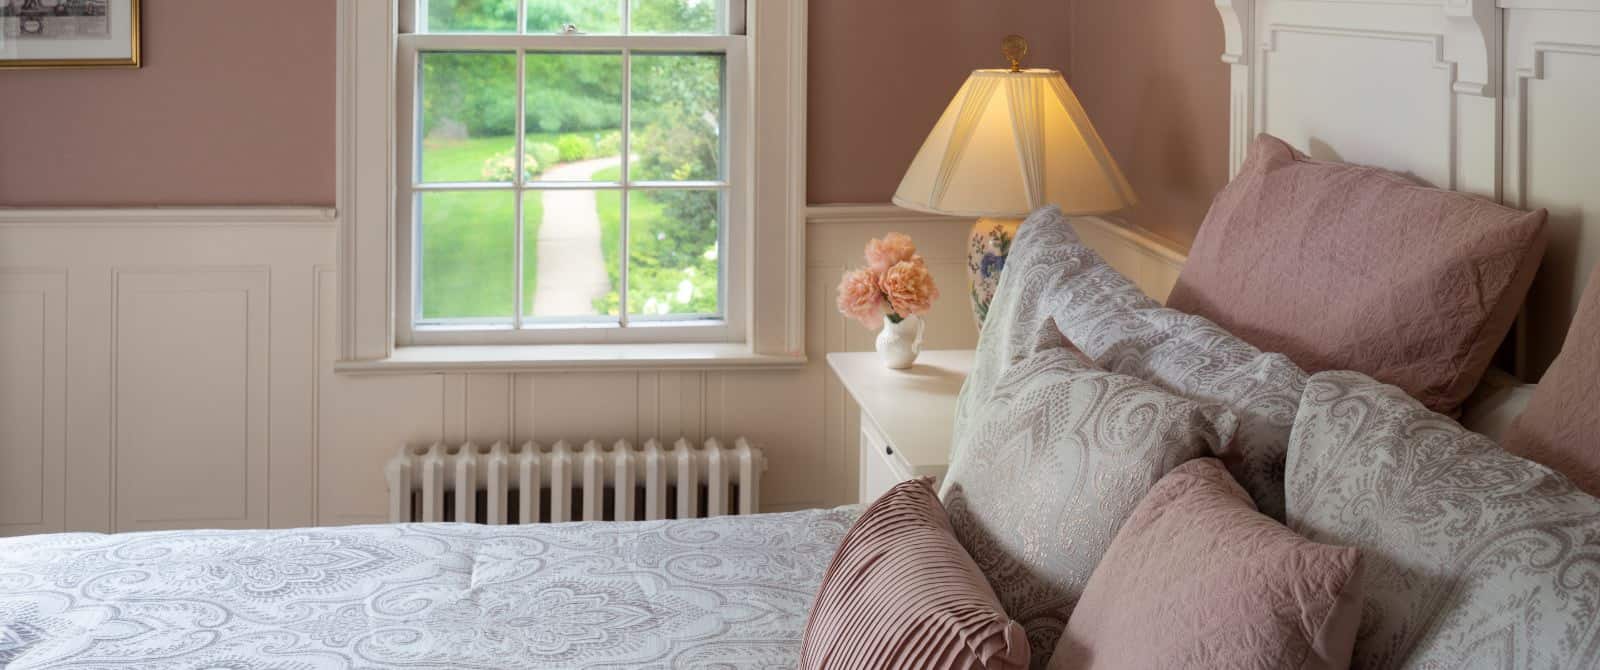 Bedroom with peach walls, white trim, light paisley bedding, white nightstand, and window